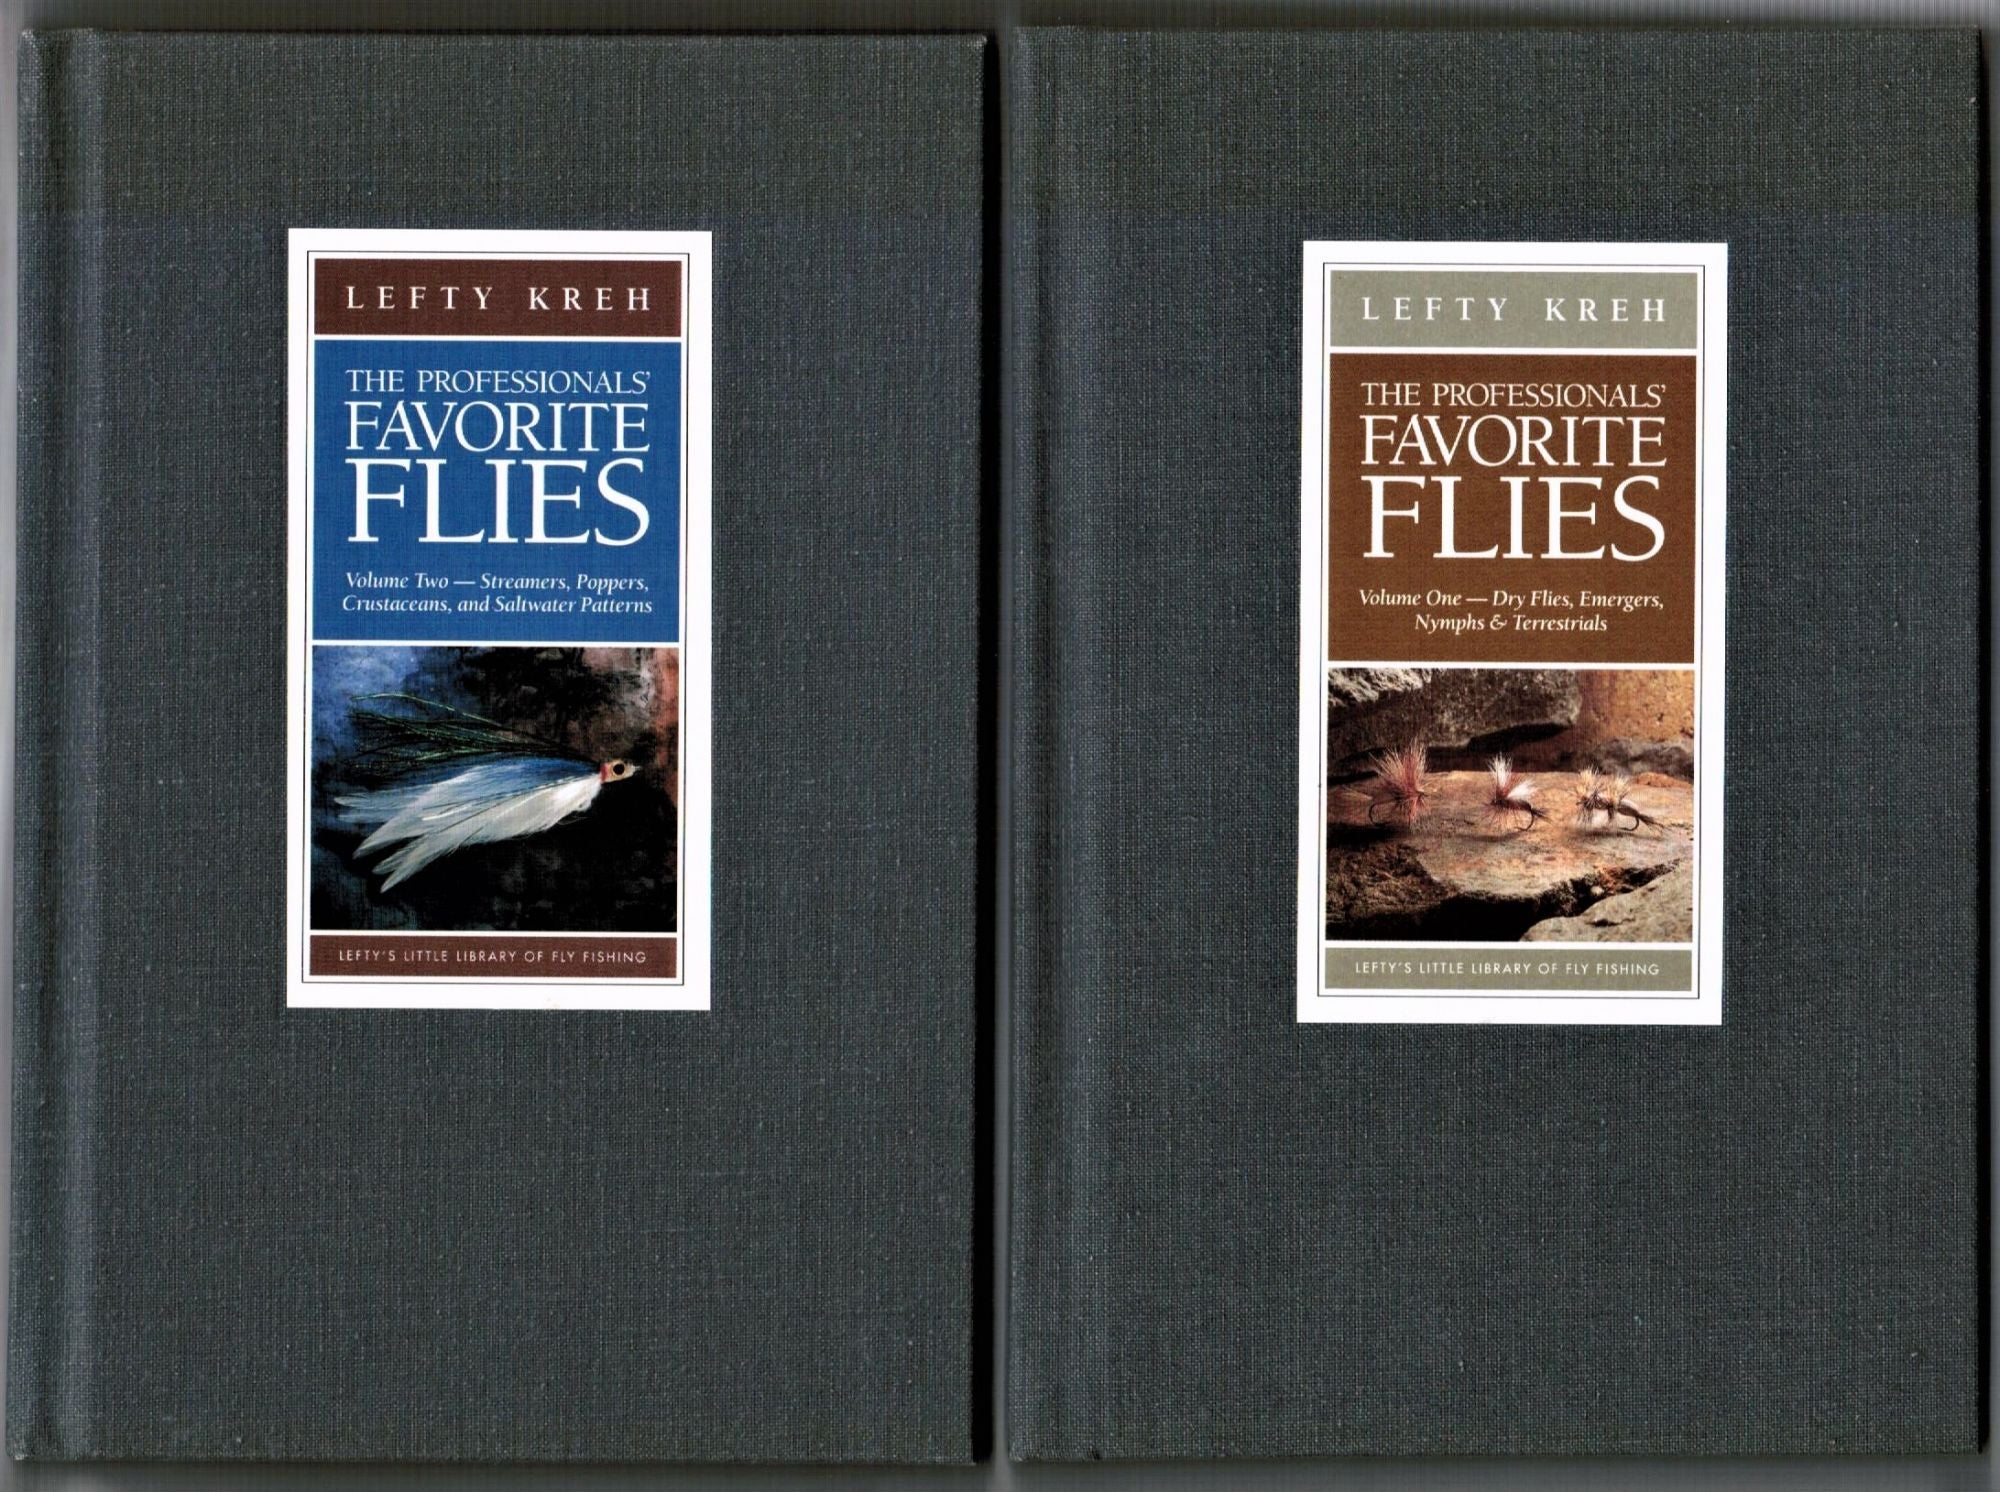 Favorite　Flies　Kreh　Fishing　Left　Volume　Library　Lefty's　of　Little　Fly　The　Professionals